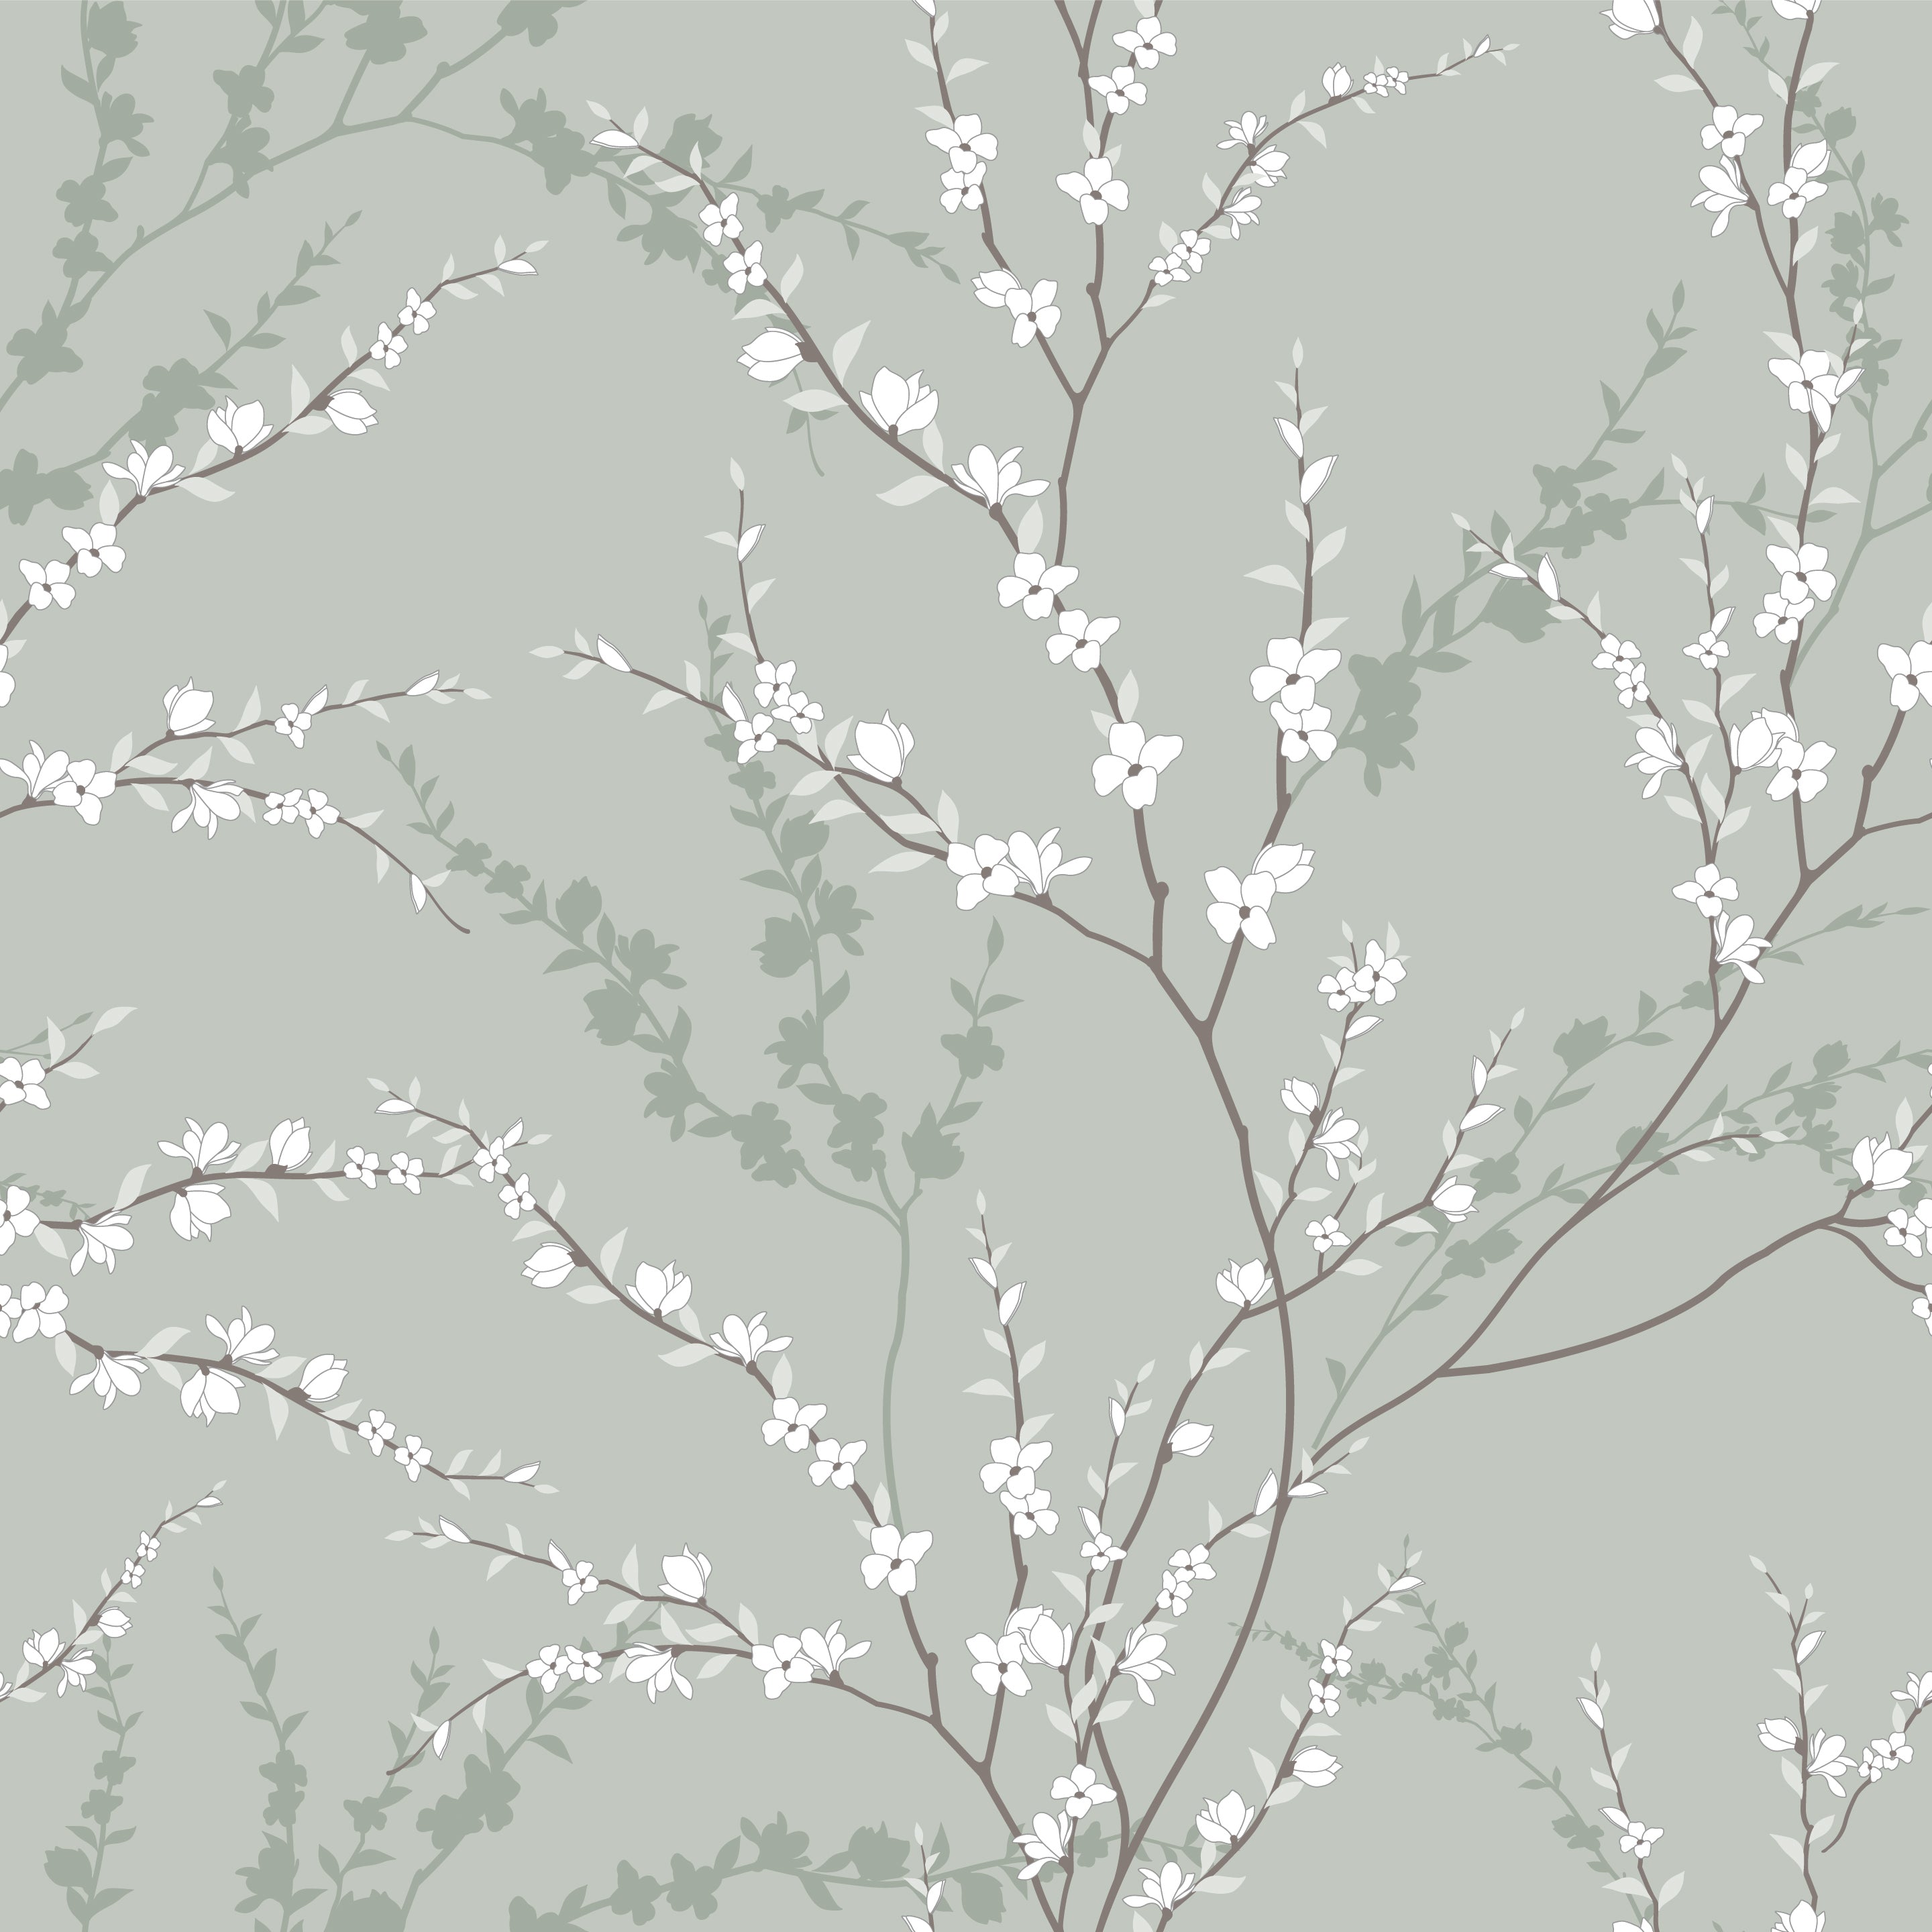 An elegant wallpaper pattern named "Enchanted Blossoms" featuring slender brown branches with scattered white blossoms set against a soothing sage green background. Shadows of leaves in darker green hues add depth and create a serene, layered effect, reminiscent of a peaceful woodland scene.